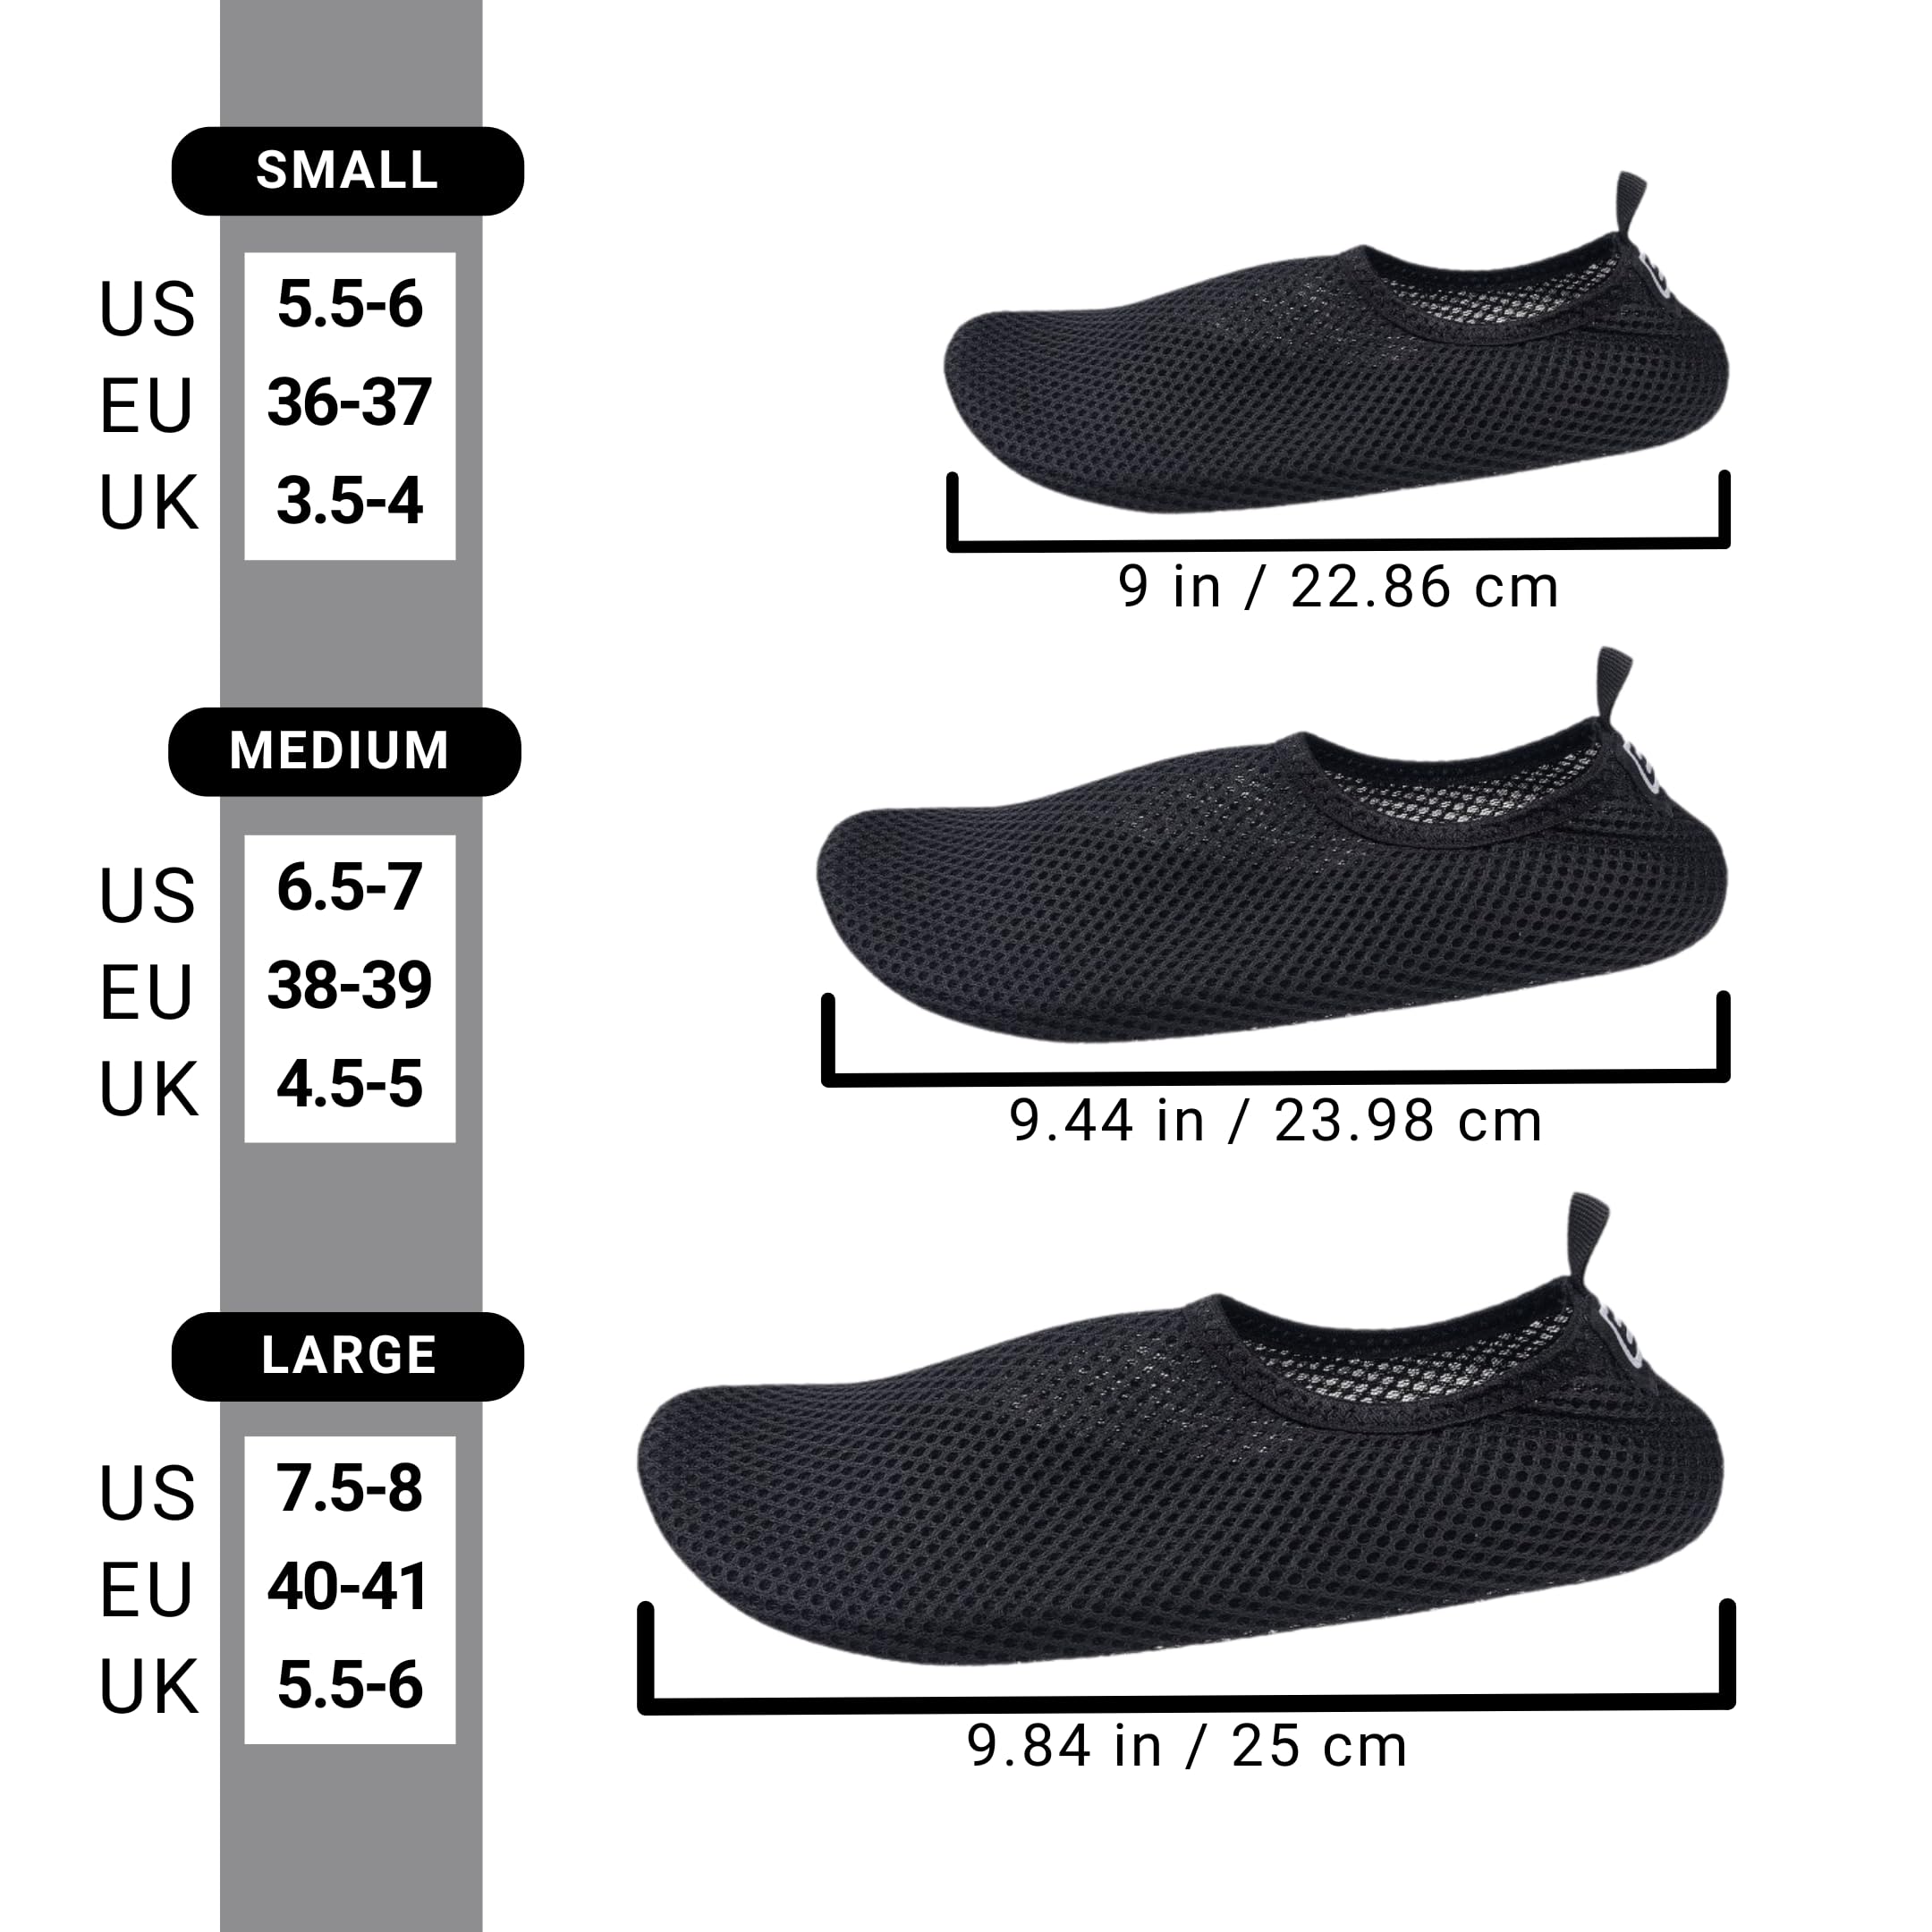 Water Shoes for Women - Extra Comfort - Protects Against Sand, Cold/Hot Water, UV, Rocks/Pebbles - Easy Fit Footwear for Swimming (Black)